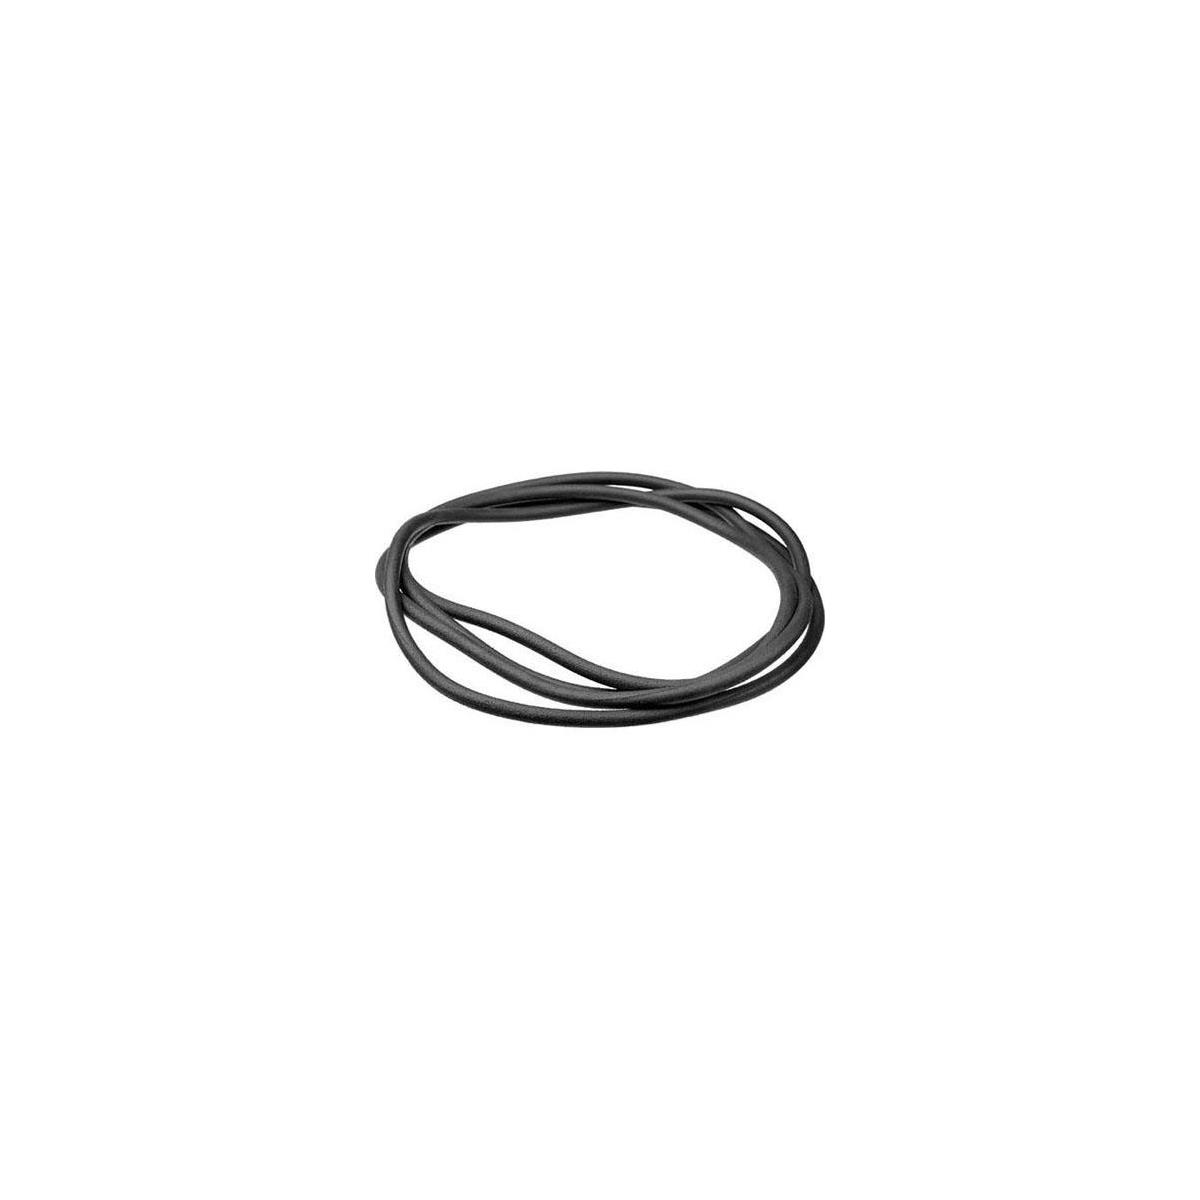 Image of Pelican 0353 Replacement O-Ring for Pelican 0350 Cases